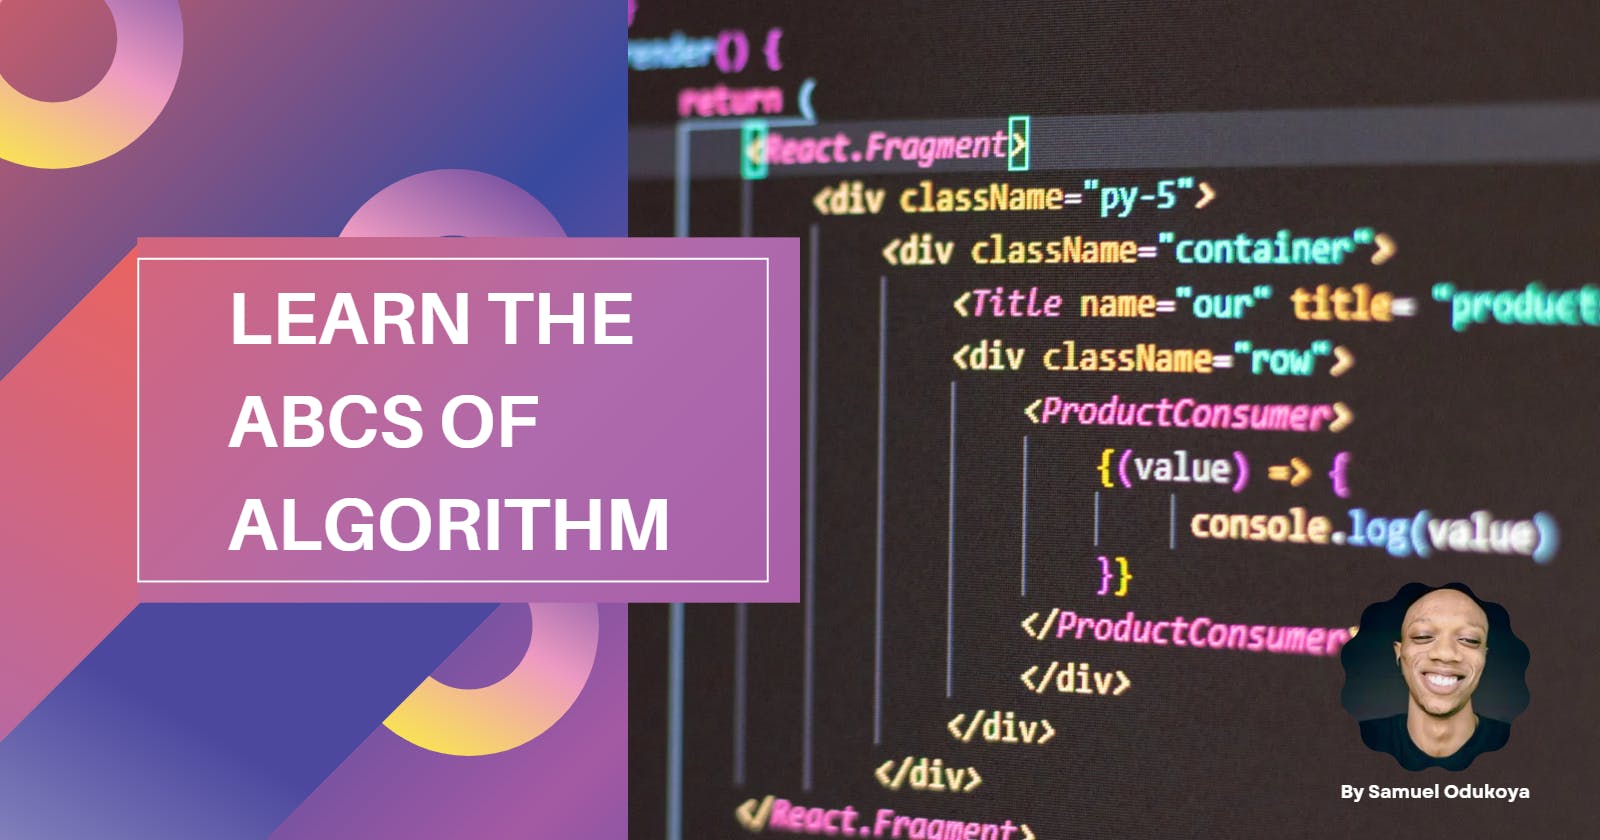 Learn the ABCs of Algorithm Alongside Free Resources to Guide you through till the End.